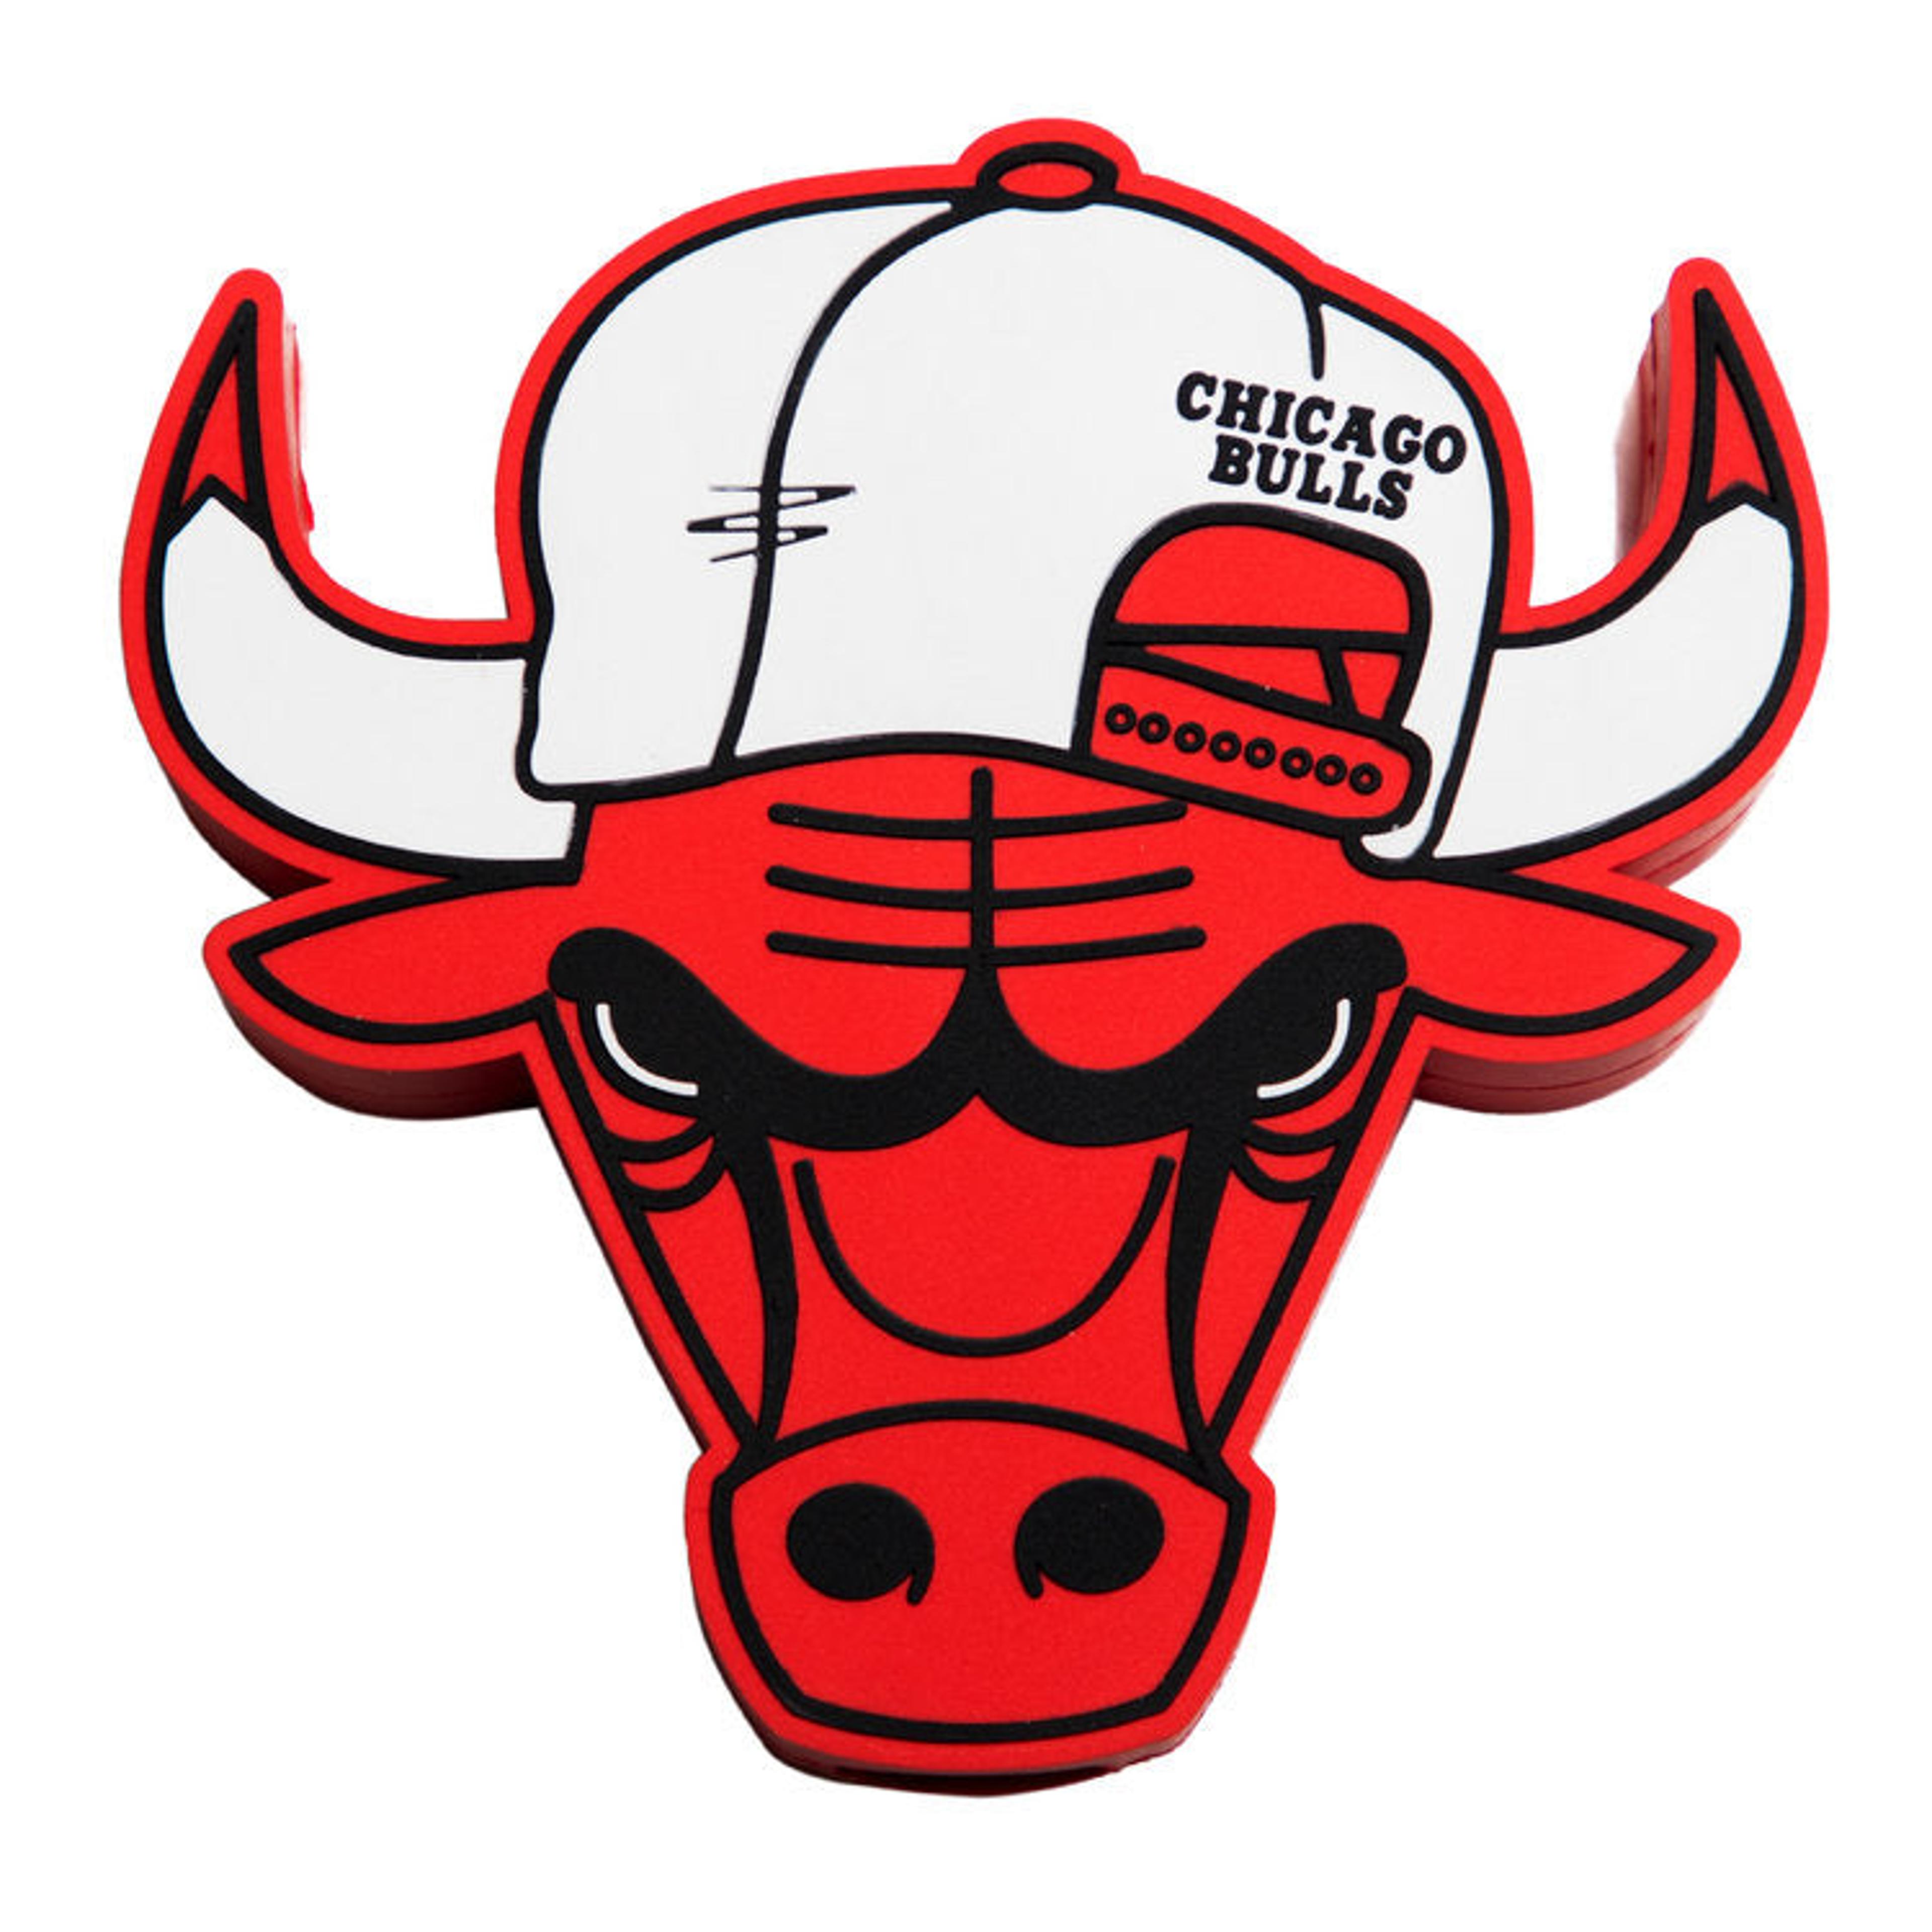 Stay Charged Up - Chicago Bulls Portable Charger